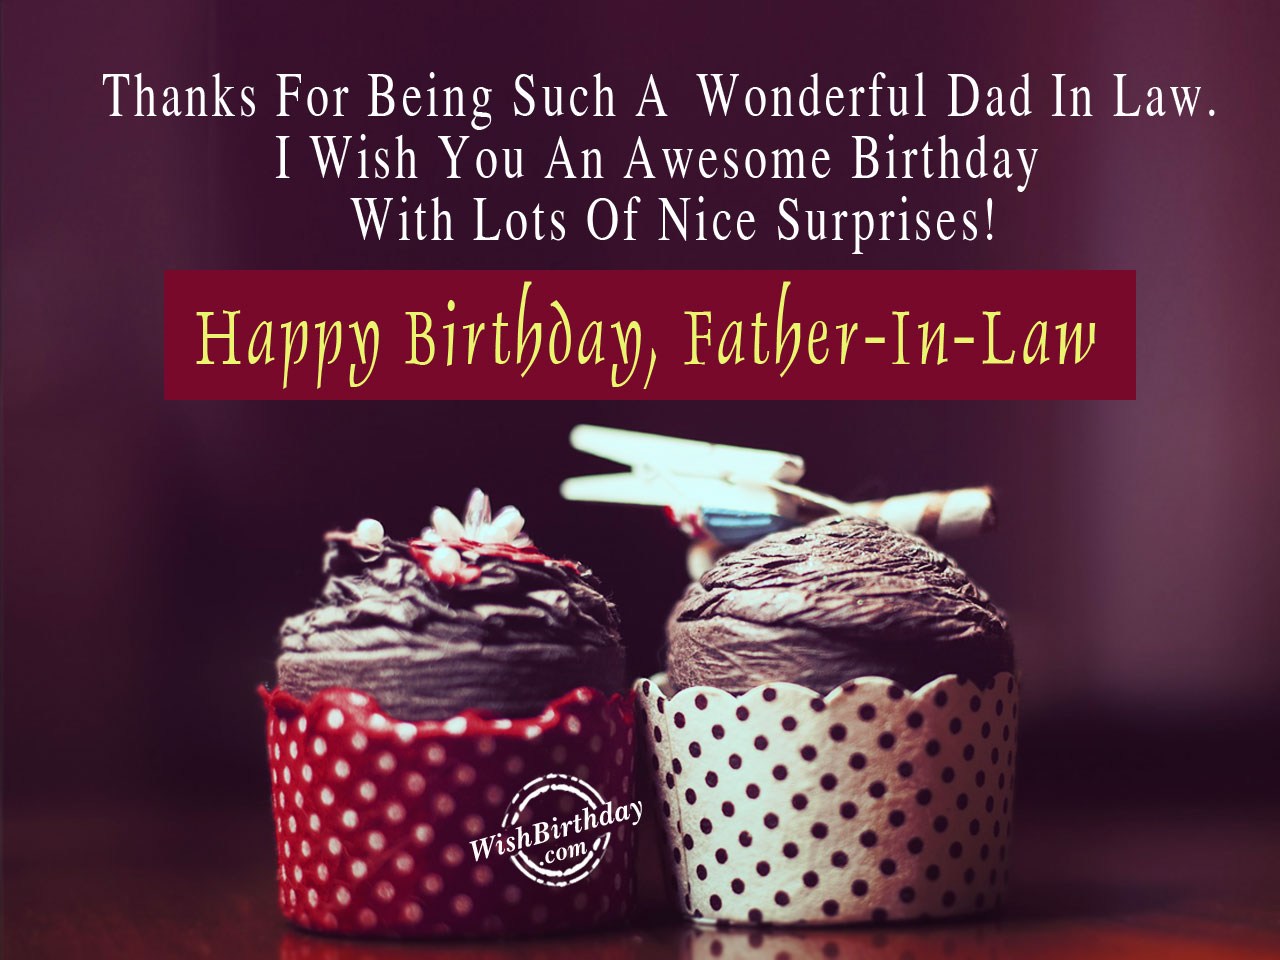 Happy Birthday Father-In-Law quotes Emotional